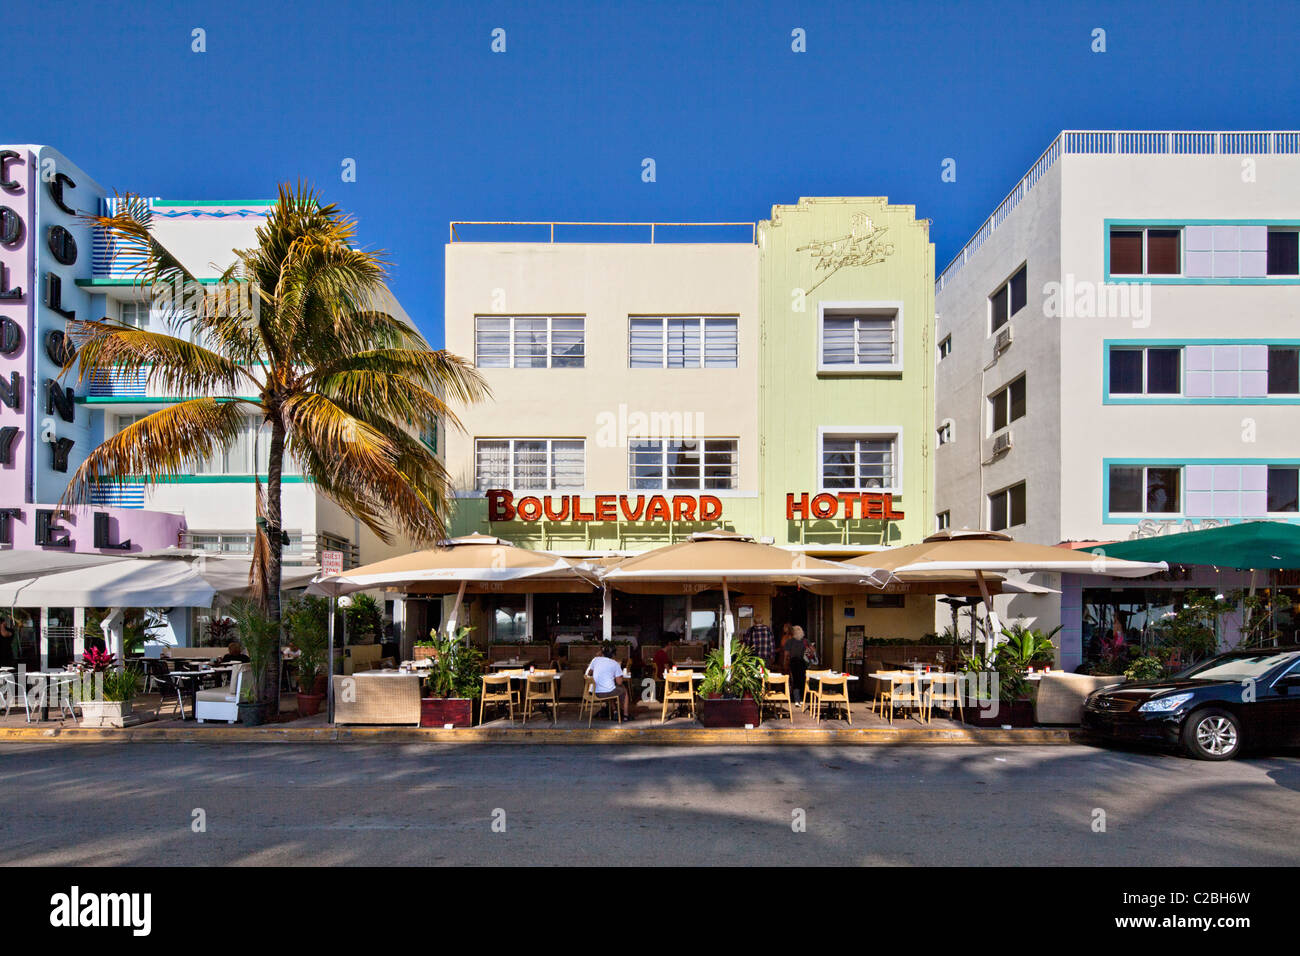 Boulevard Hotel, South Beach, Miami Banque D'Images